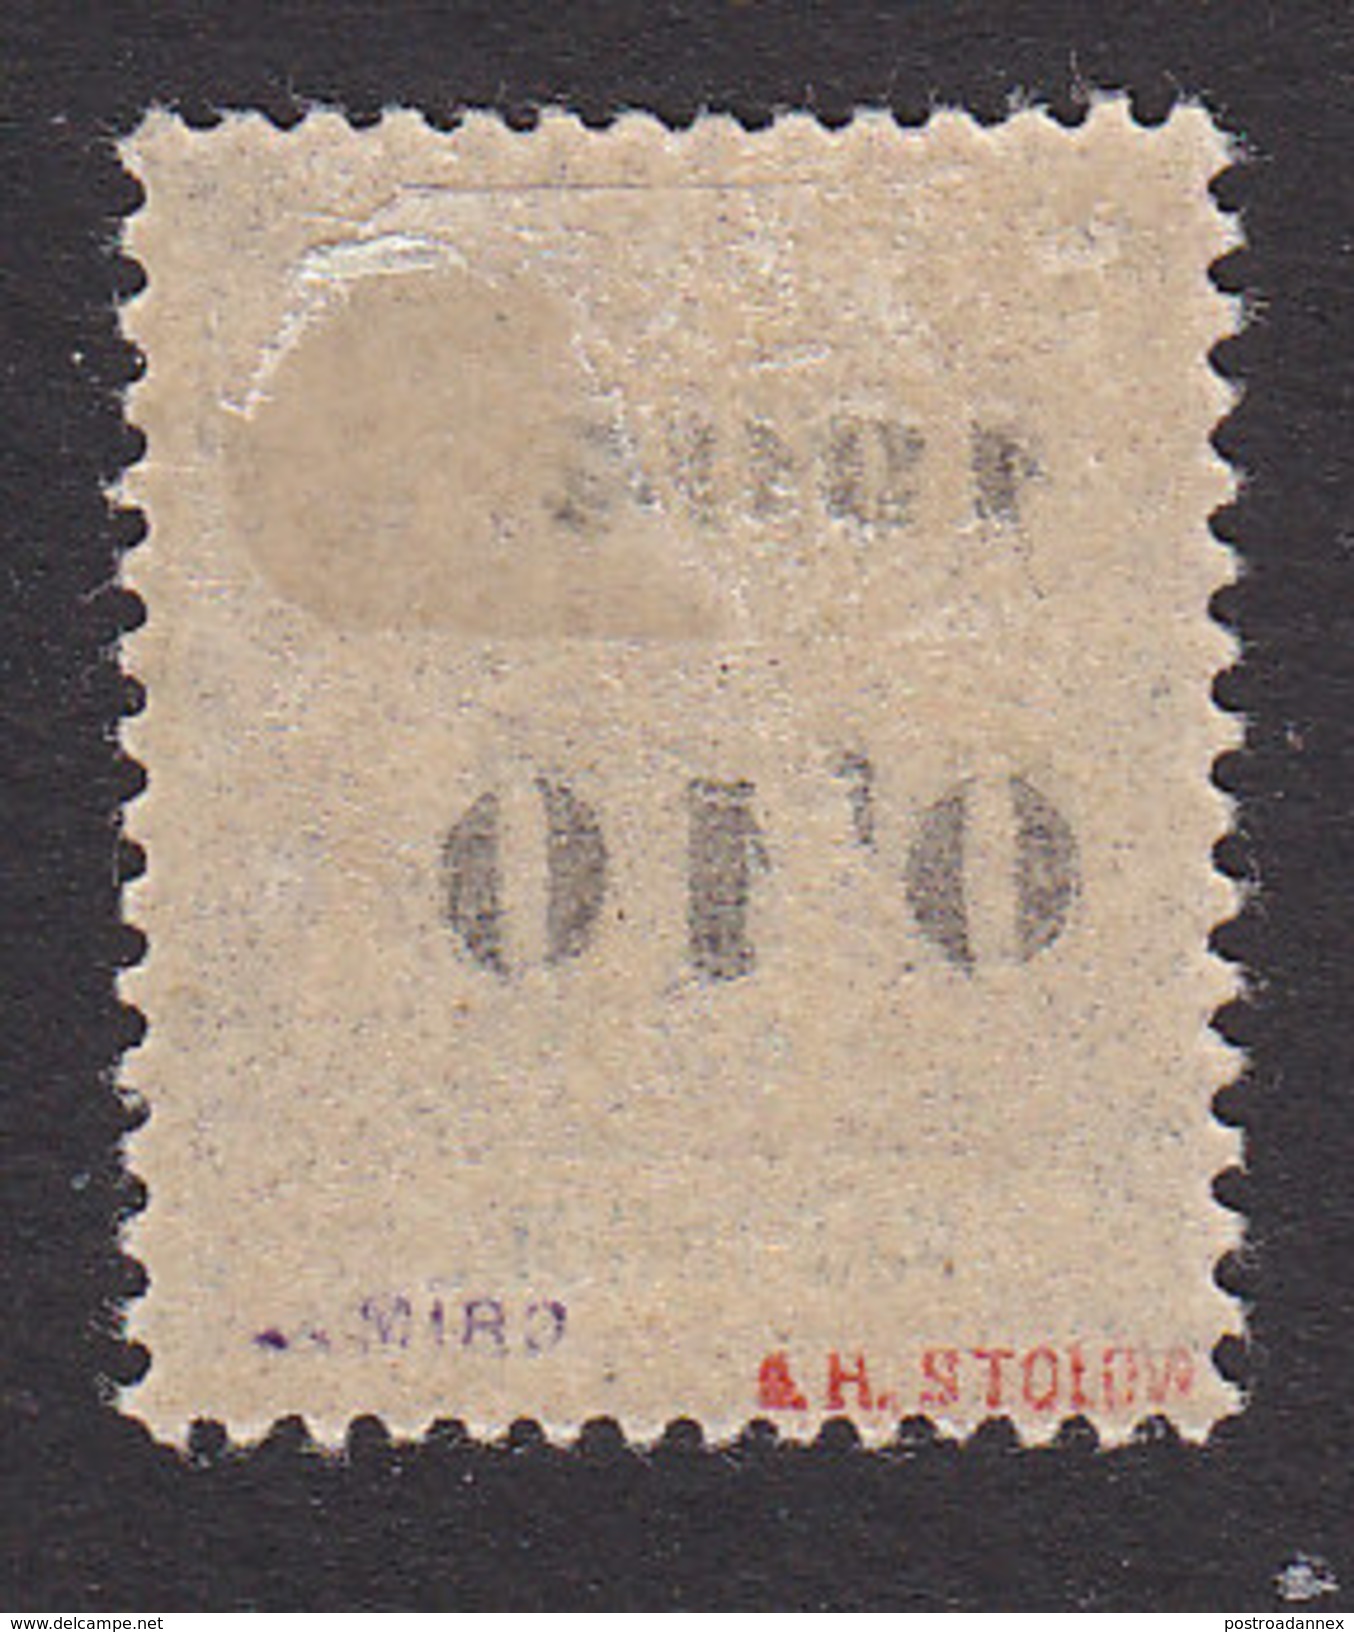 Martinique, Scott #61, Mint Hinged, Navigation And Commerce Surcharged, Issued 1904 - Unused Stamps